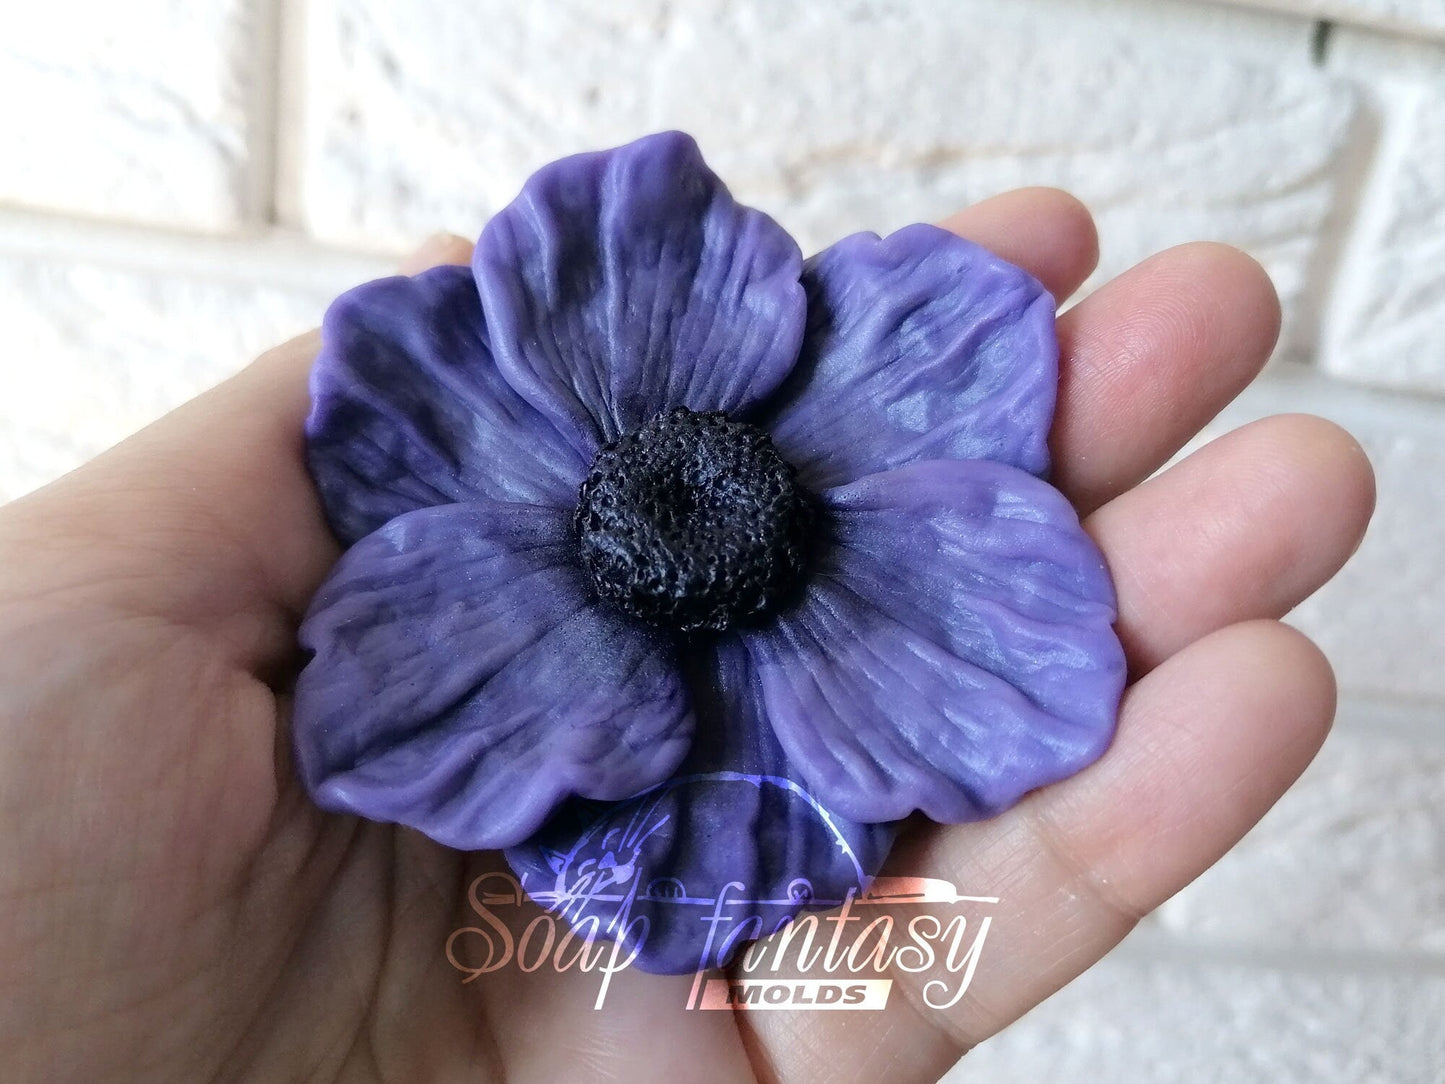 SALE of Anemone (very simple) silicone mold for soap making